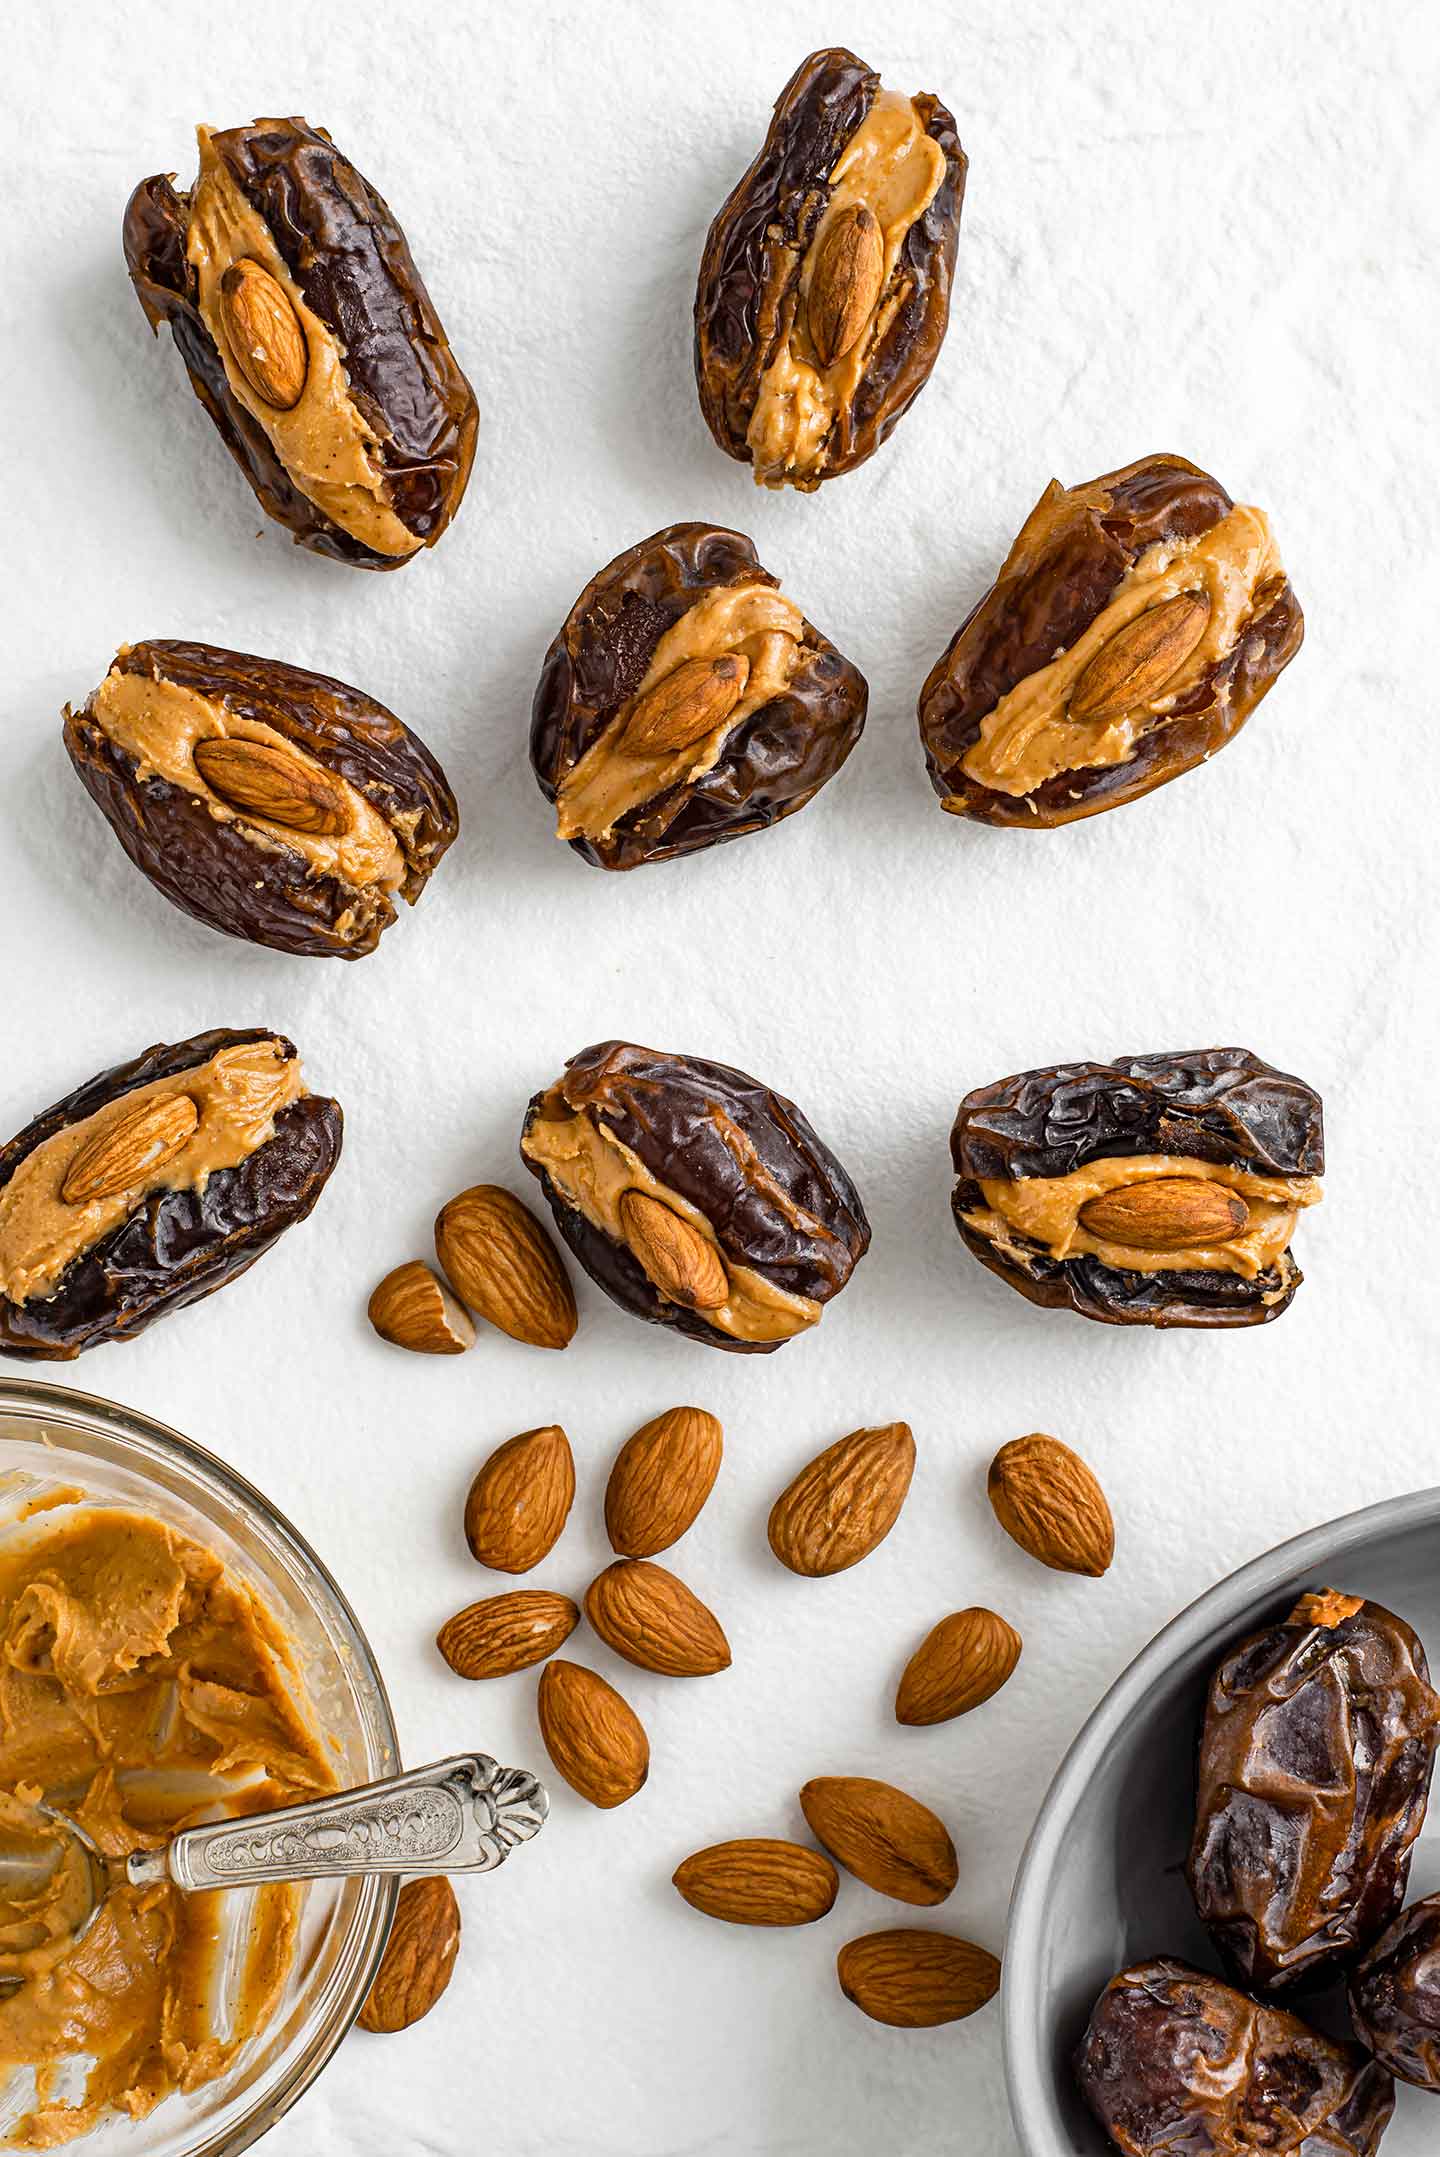 Peanut butter filled dates with almonds in the centre are scattered on a white tray. Loose almonds, a bowl of medjool dates, and a bowl of peanut butter are also pictured.